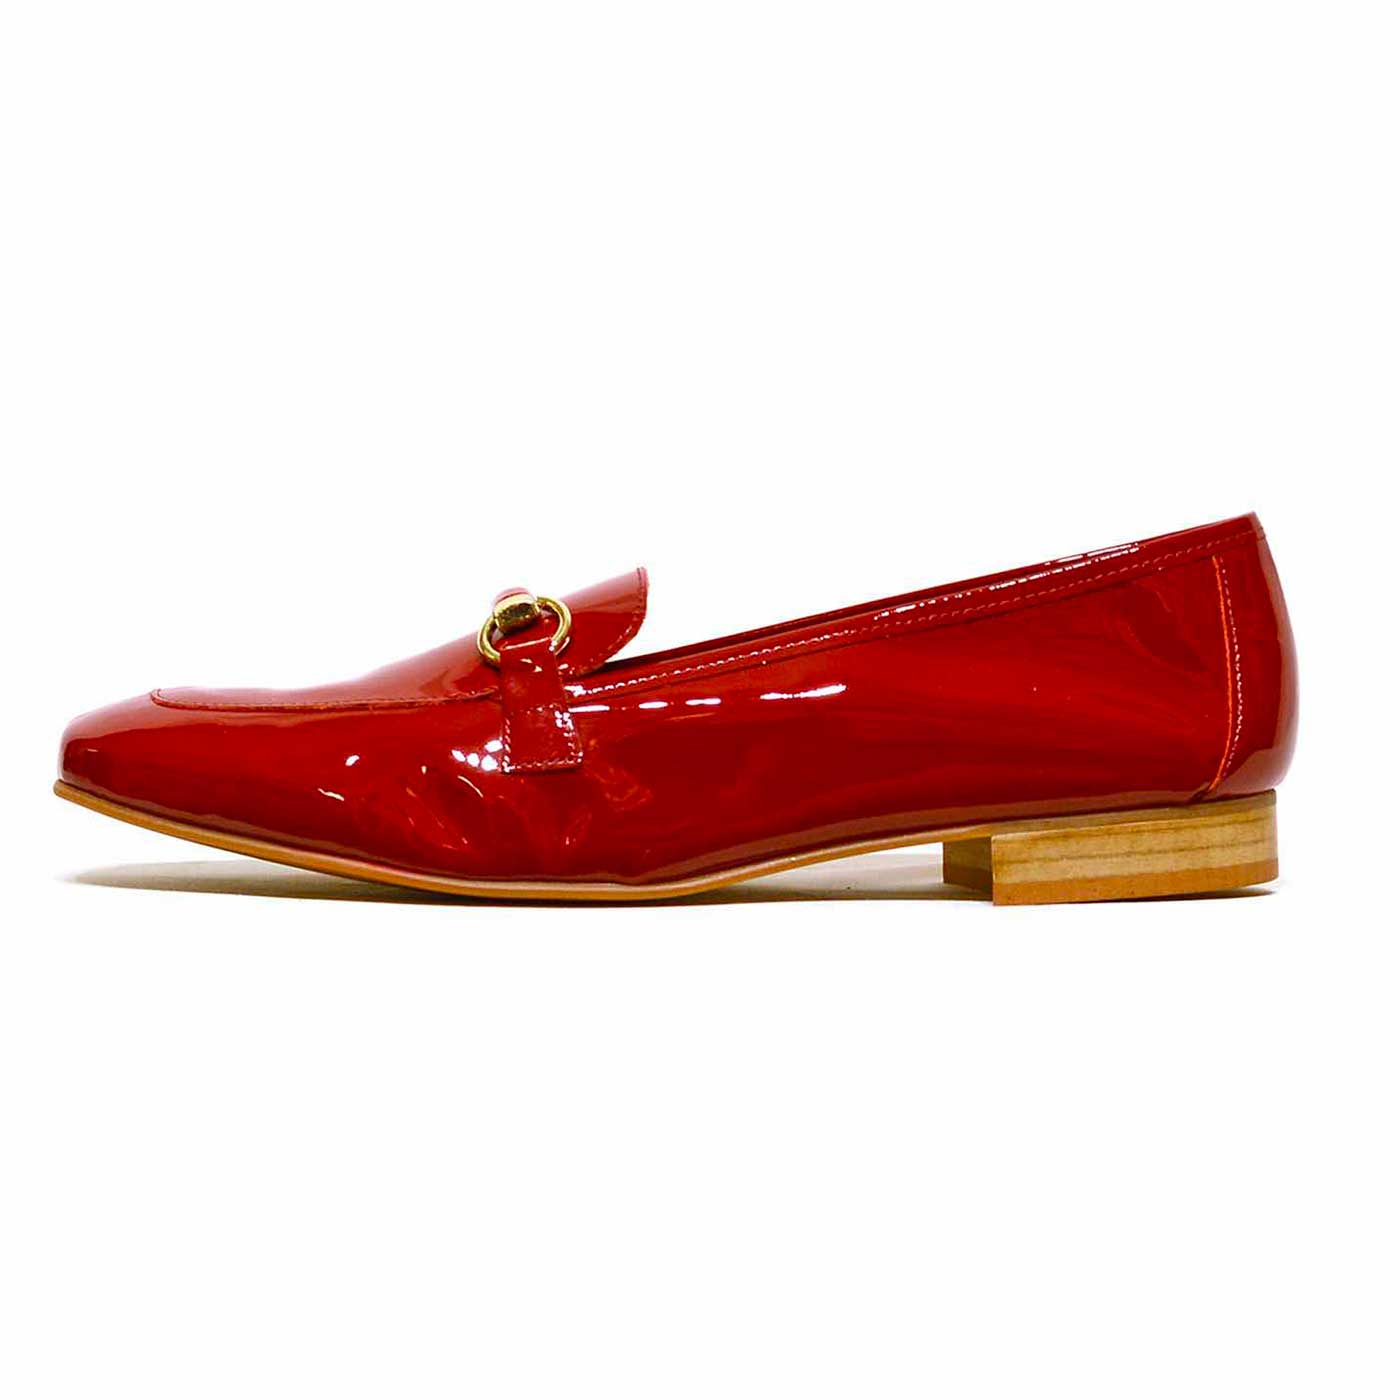 mocassins vernis rouge, chaussures femme grande taille